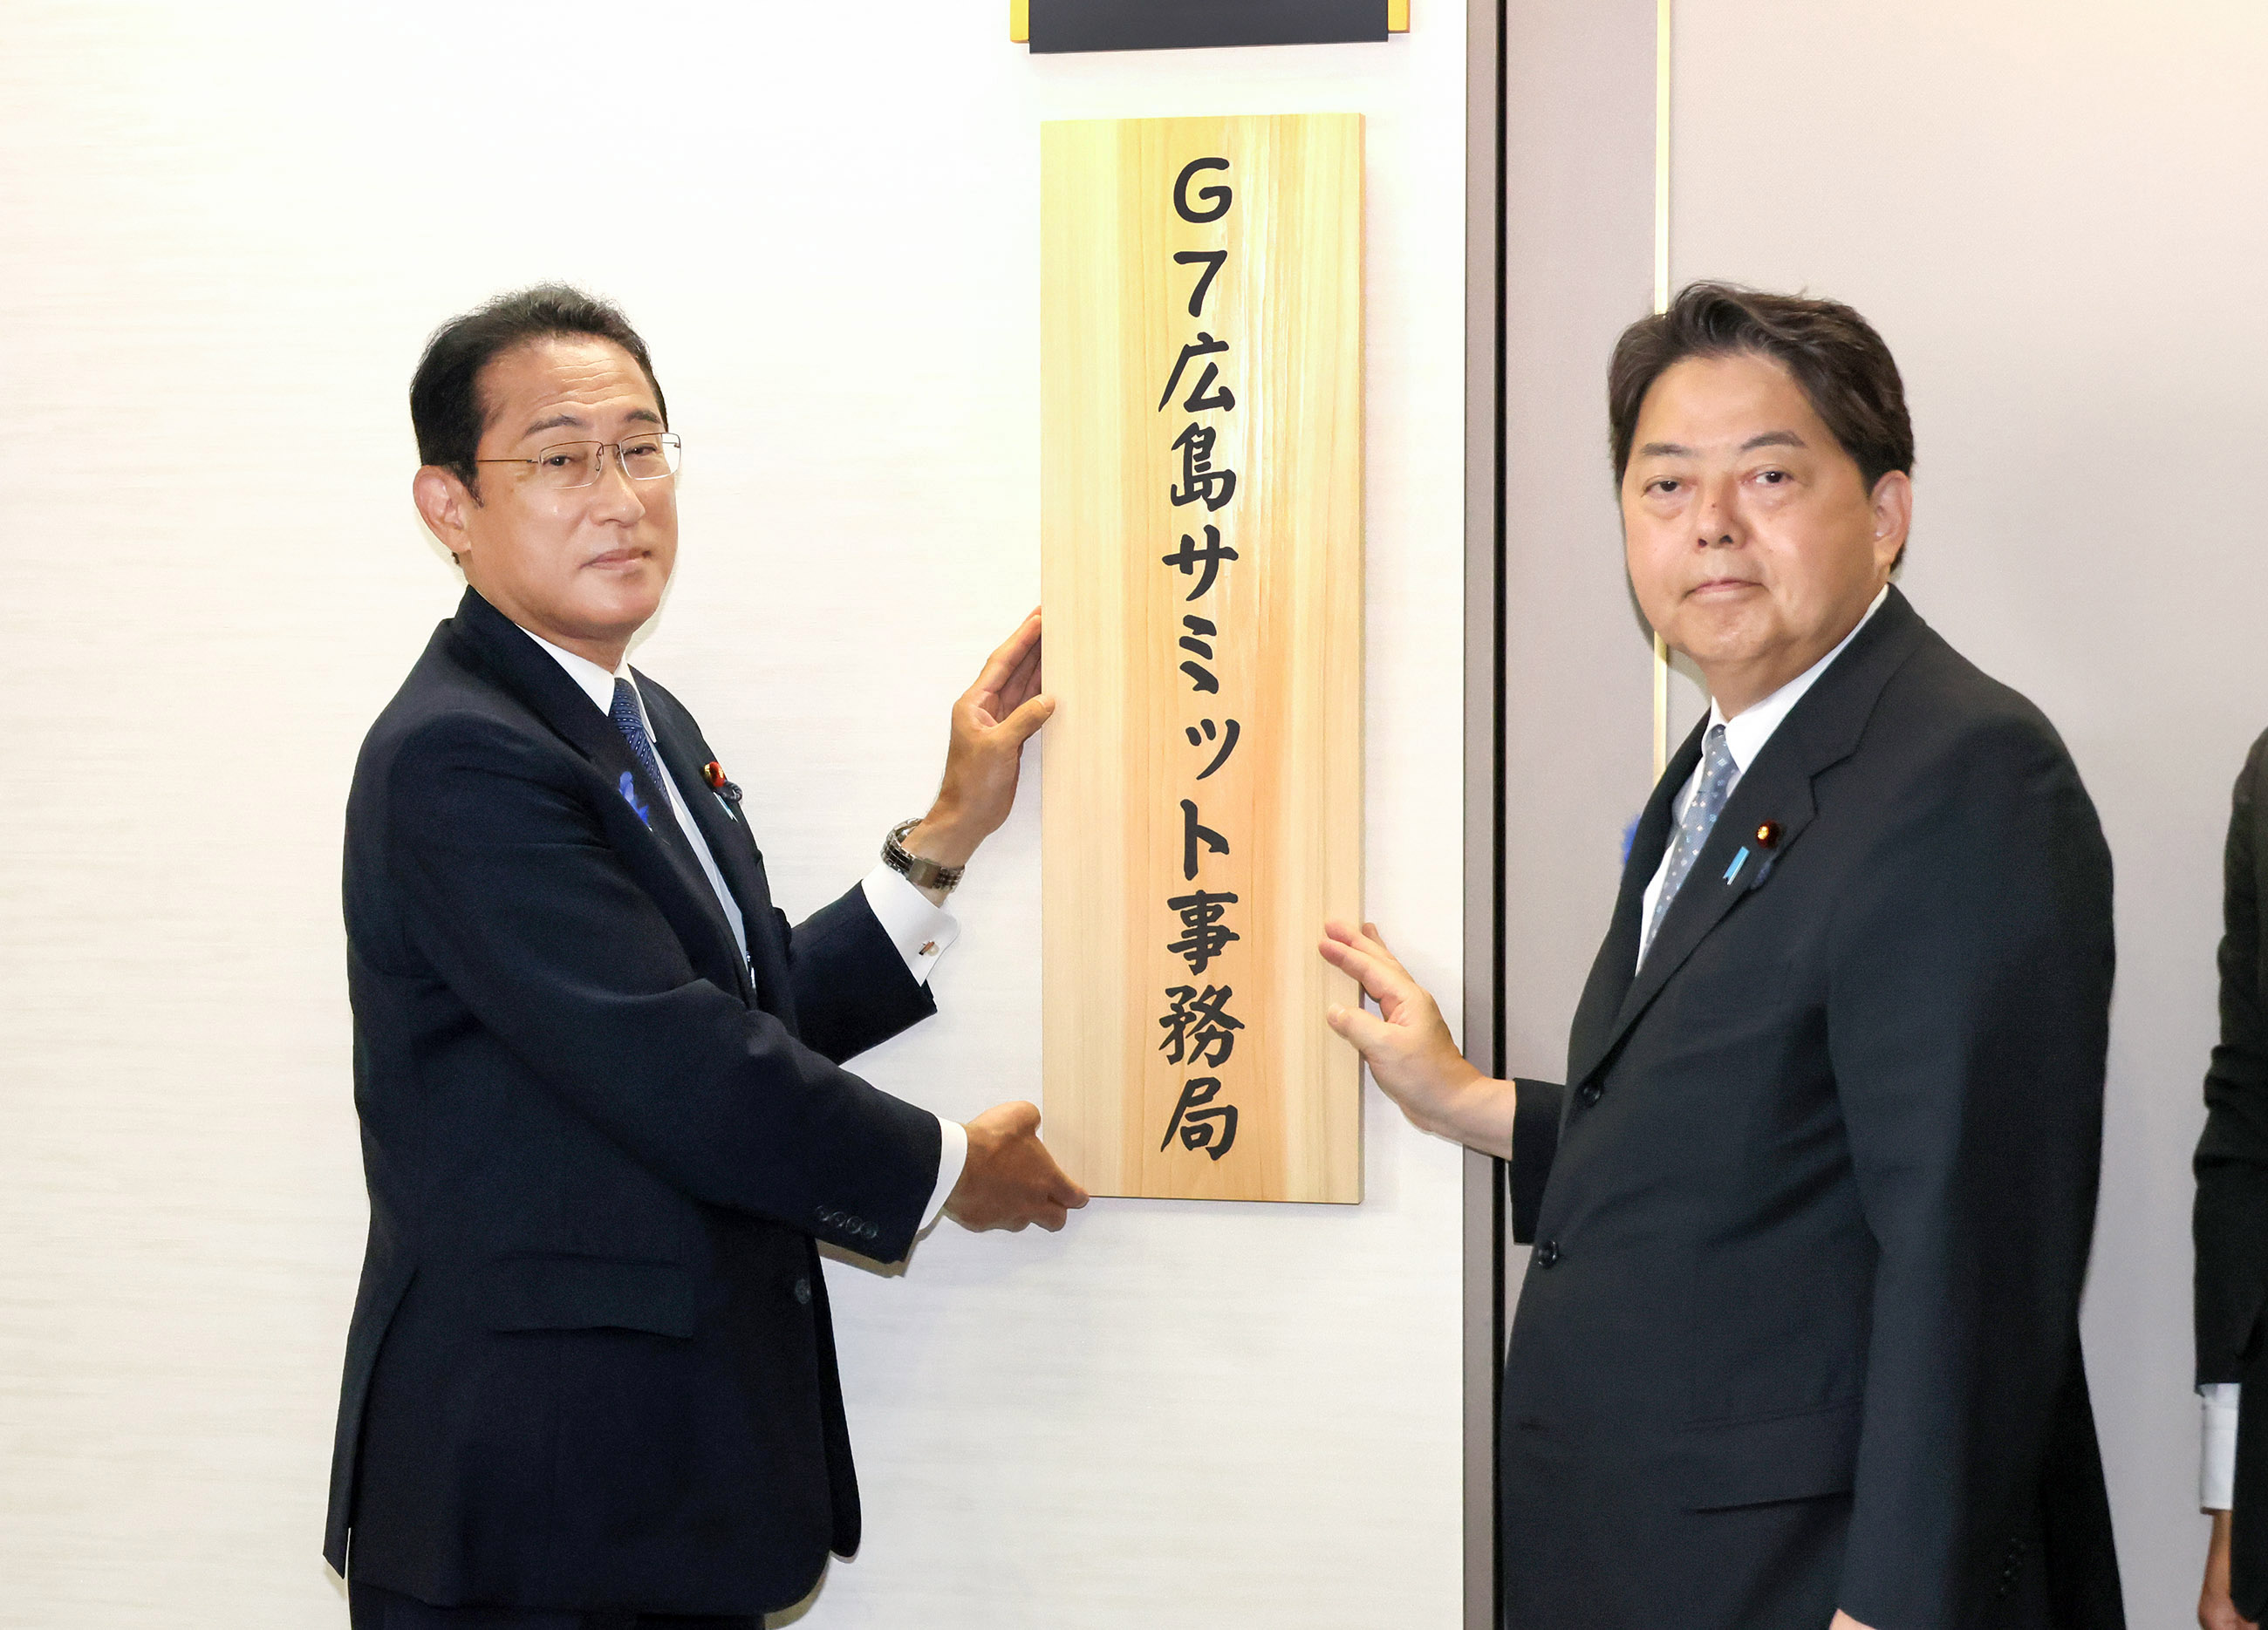 Photograph of the Prime Minister installing a signboard (1)